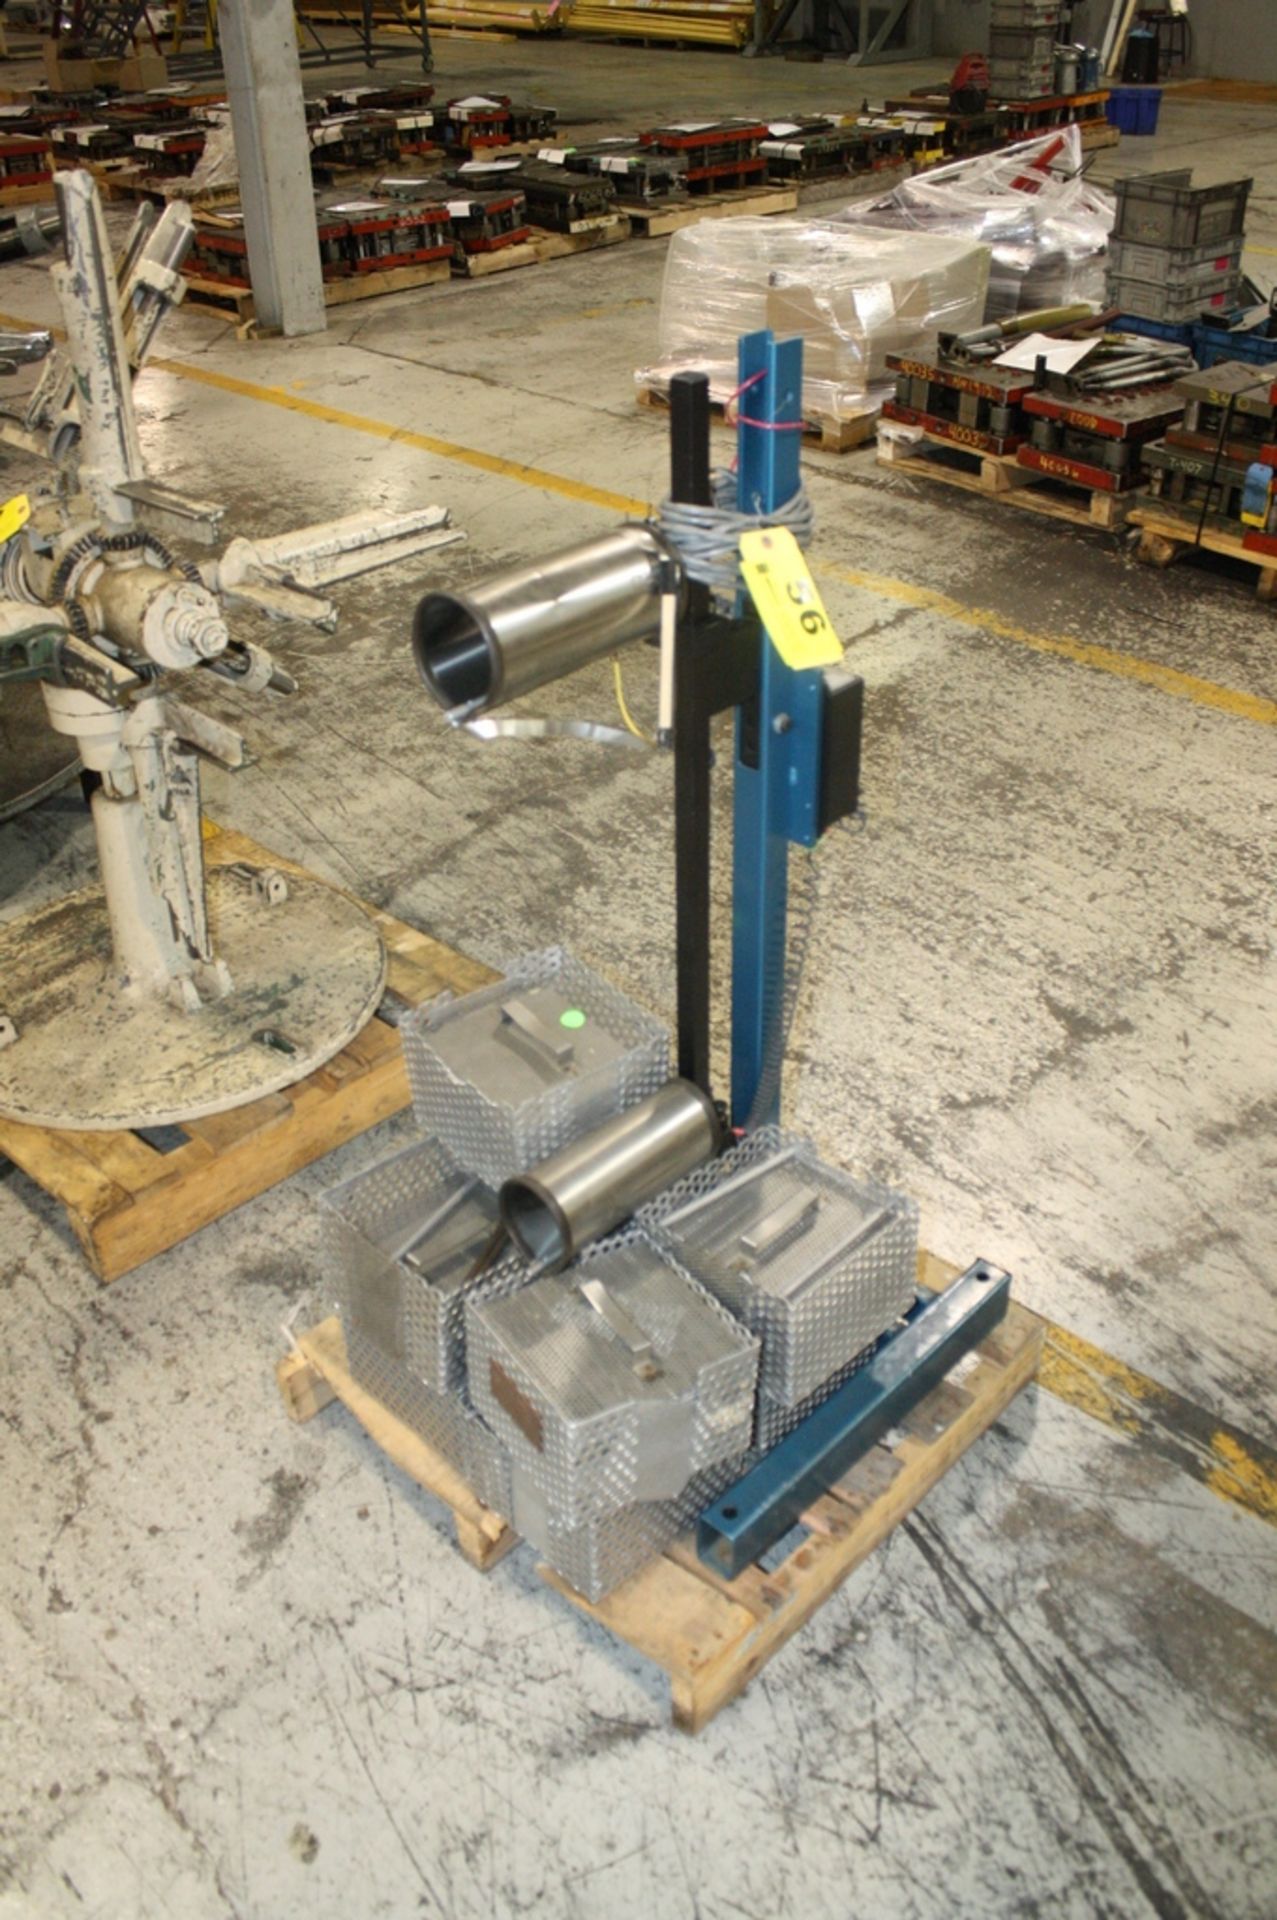 RAPID-AIR PROPORTIONAL TOUCN CONTROL, MOUNTED ON STEEL STAND